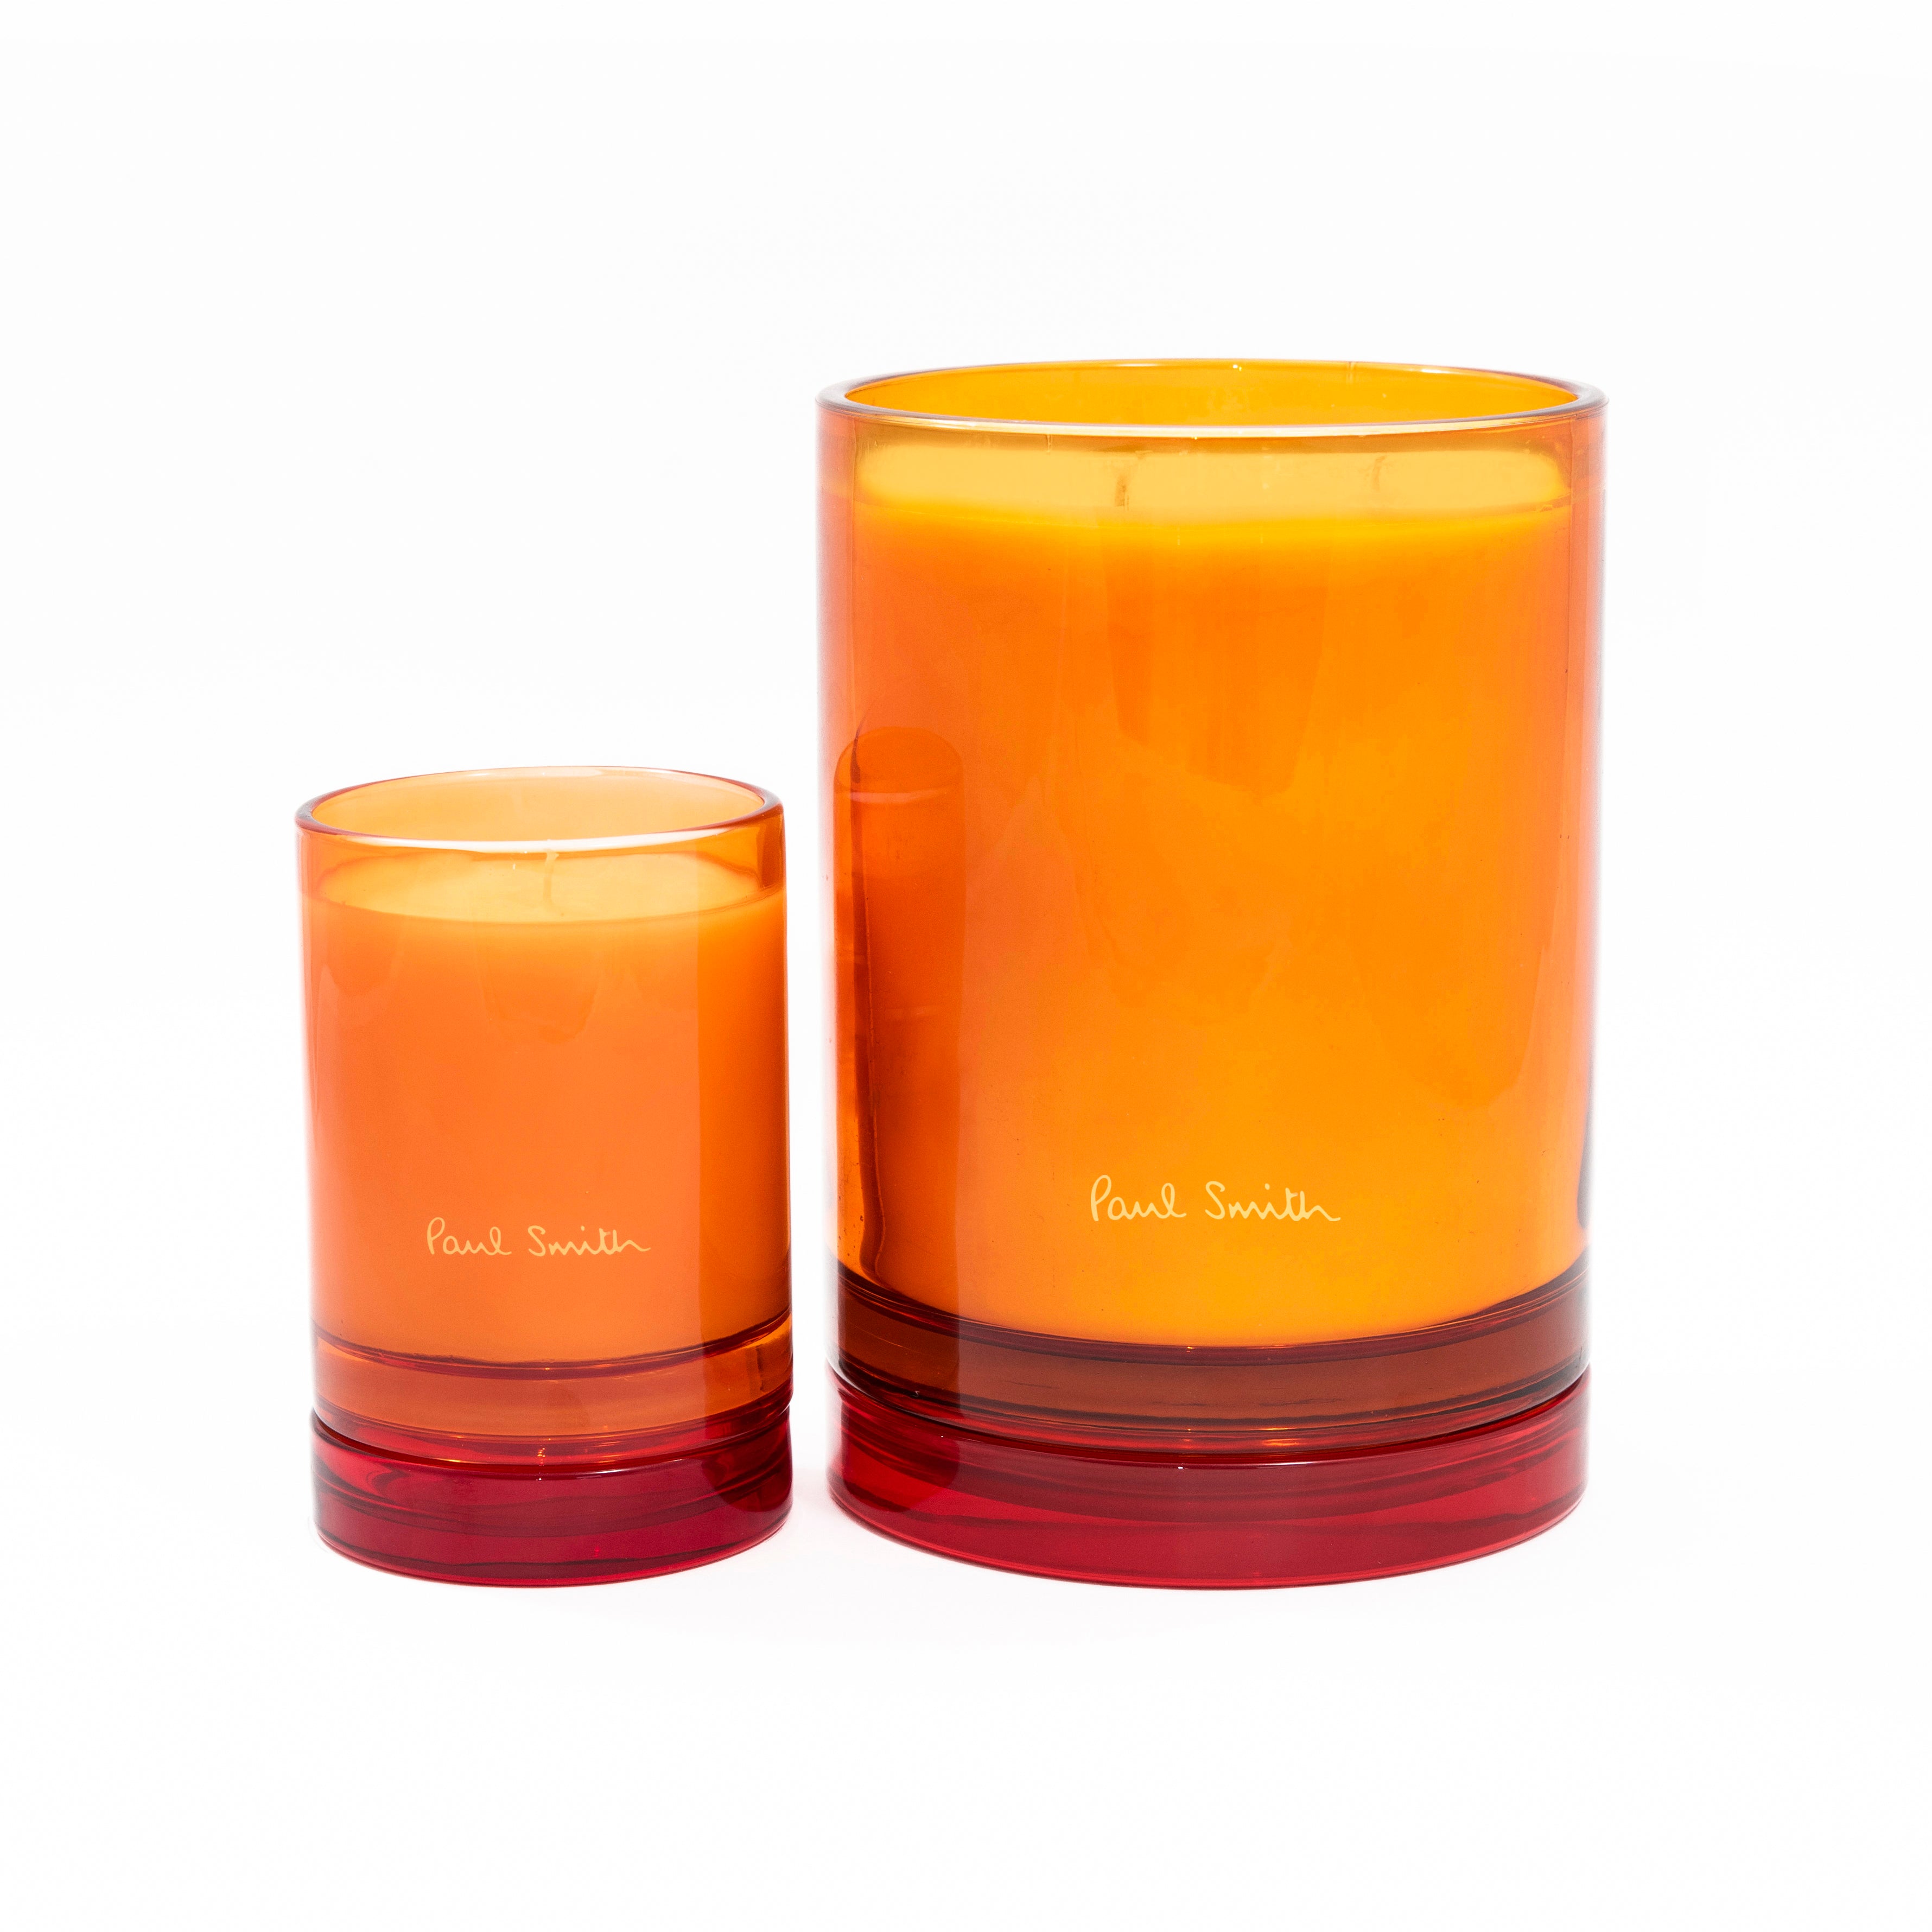 Paul Smith Bookworm Candle 1kg